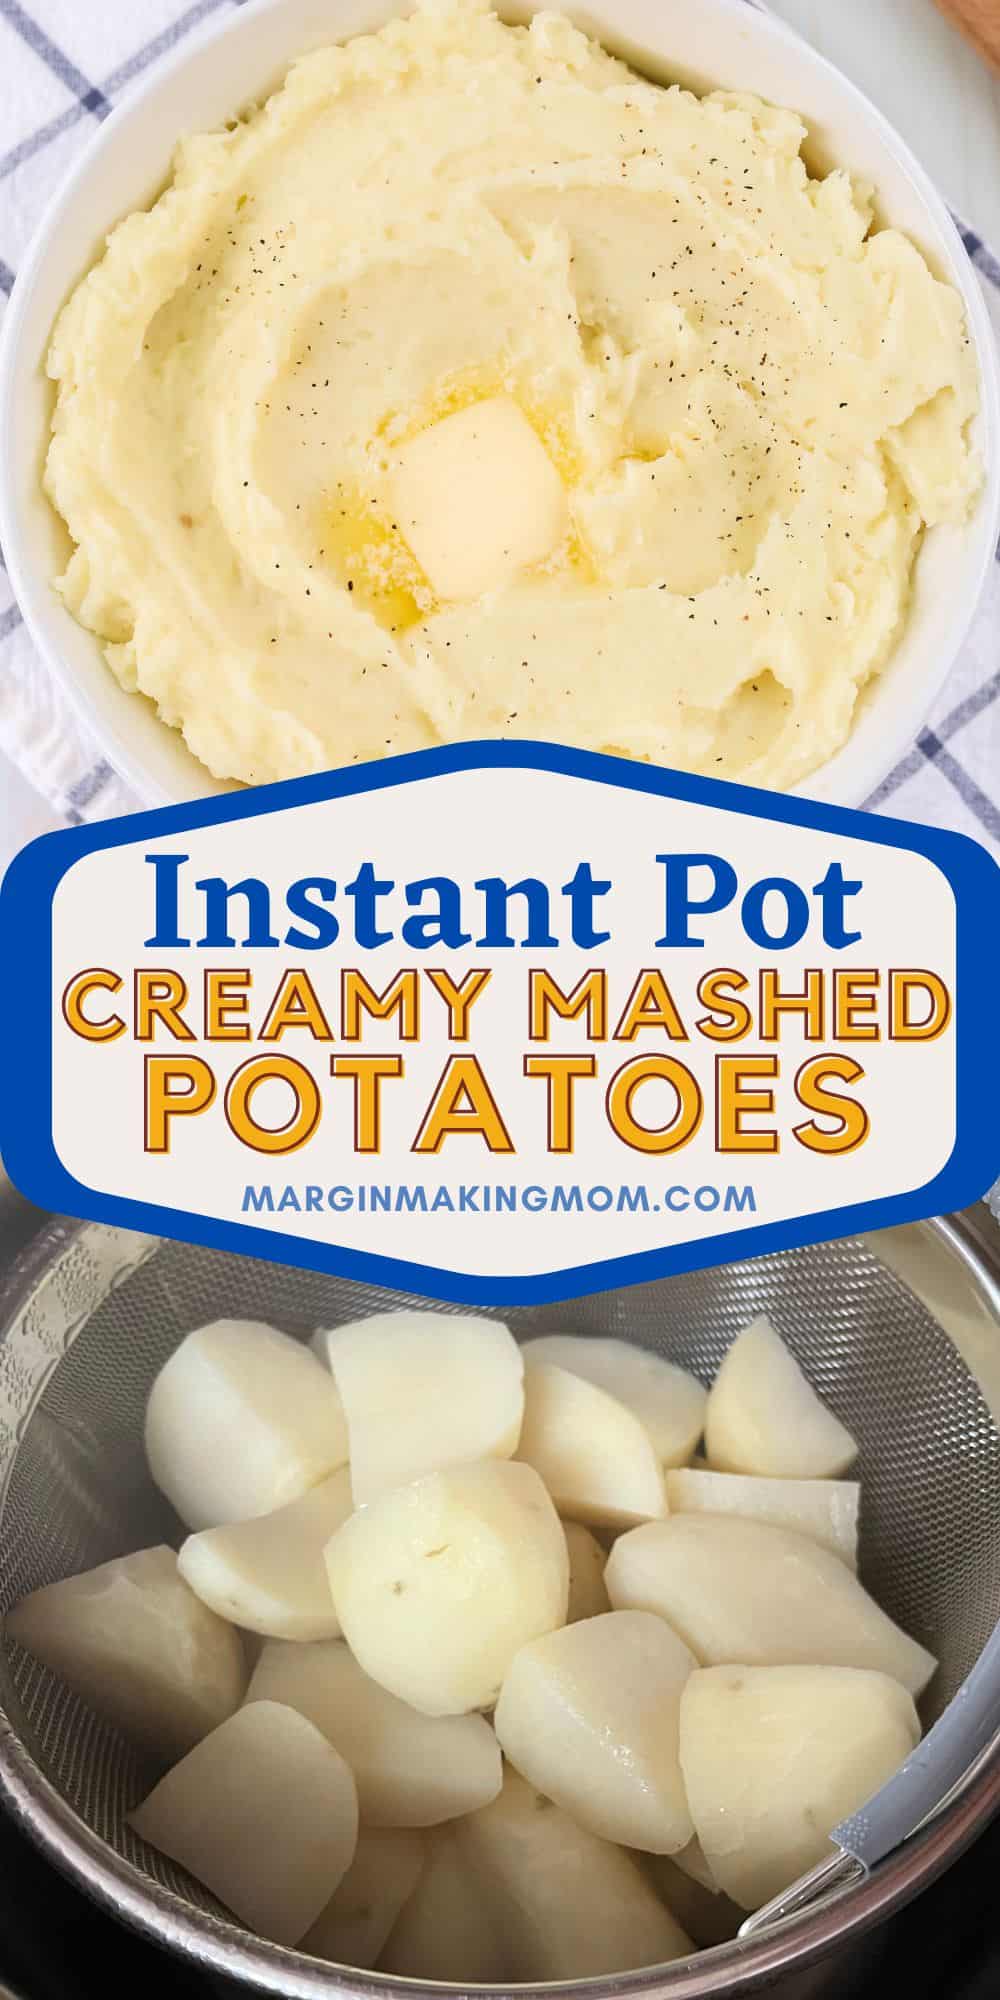 two photos; one shows a bowl of instant pot mashed potatoes with salt, pepper, and butter on top; the other shows quartered peeled potatoes in an instant pot steamer basket.